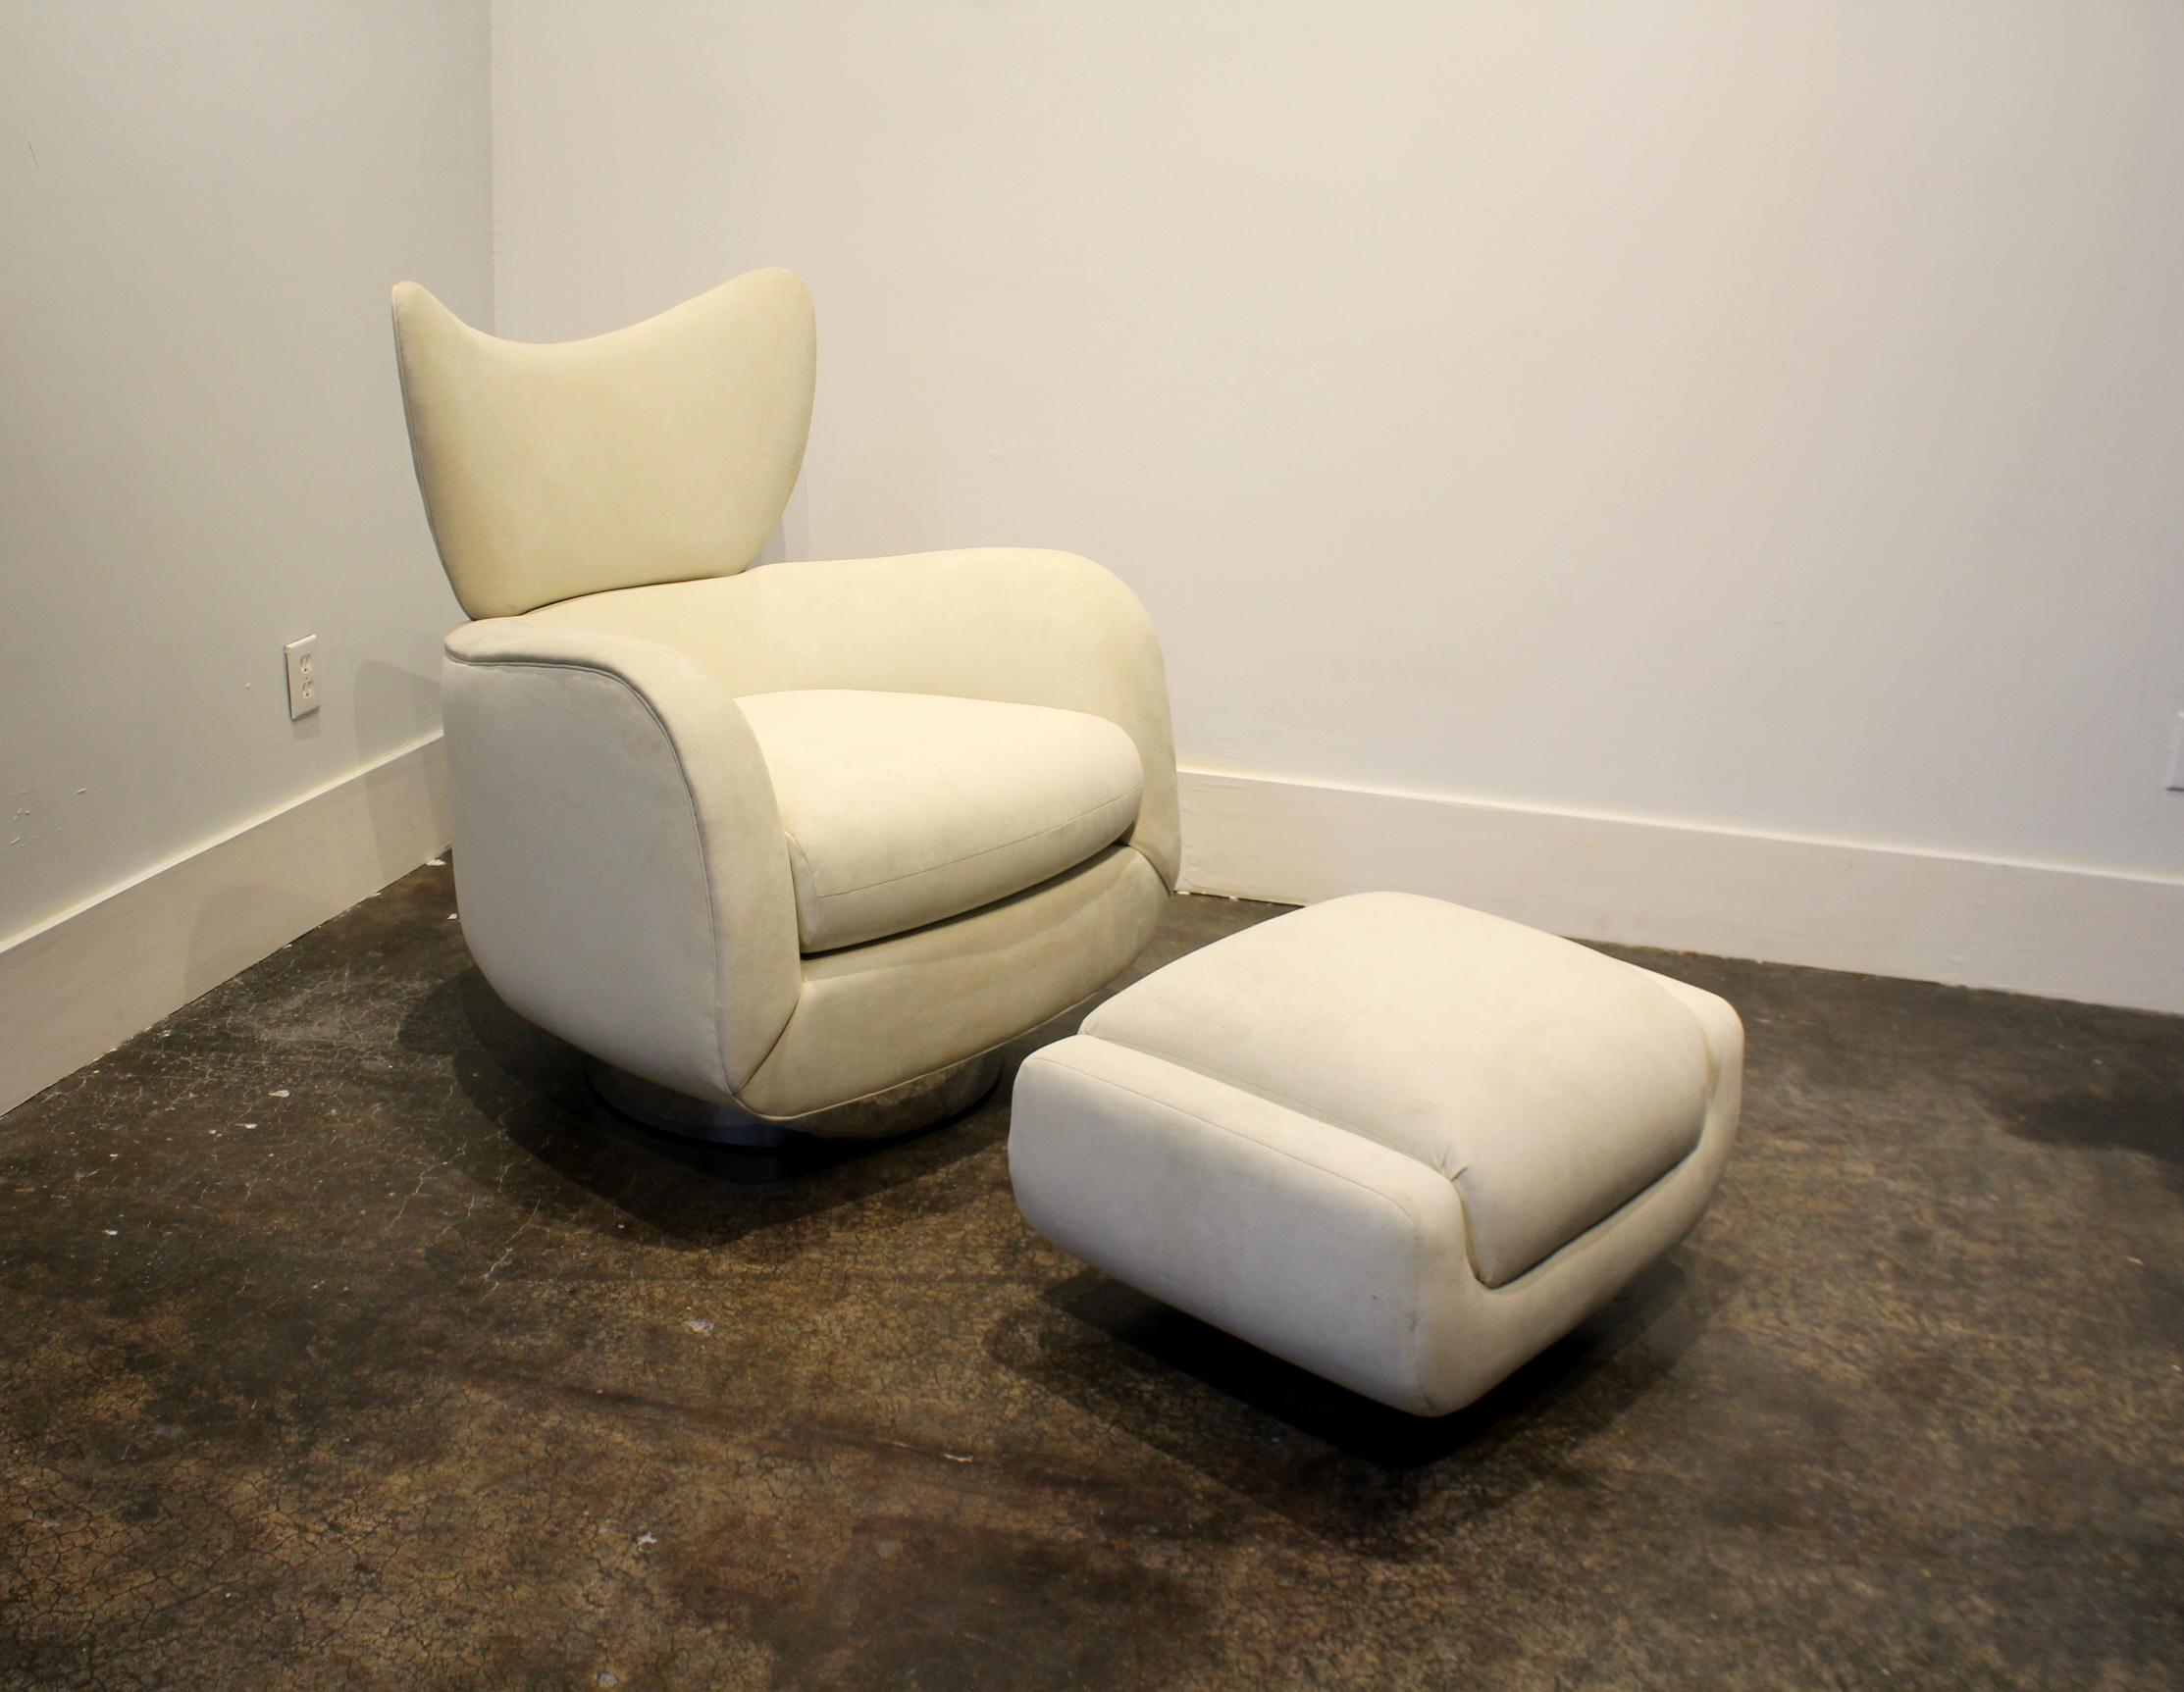 Stunning and rare design by Vladimir Kagan for Directional Furniture. Large, comfy and curvaceous wing-back lounge chair and ottoman in white Ultrasuede. Both raised on circular steel chrome base. In good condition, very minor signs of